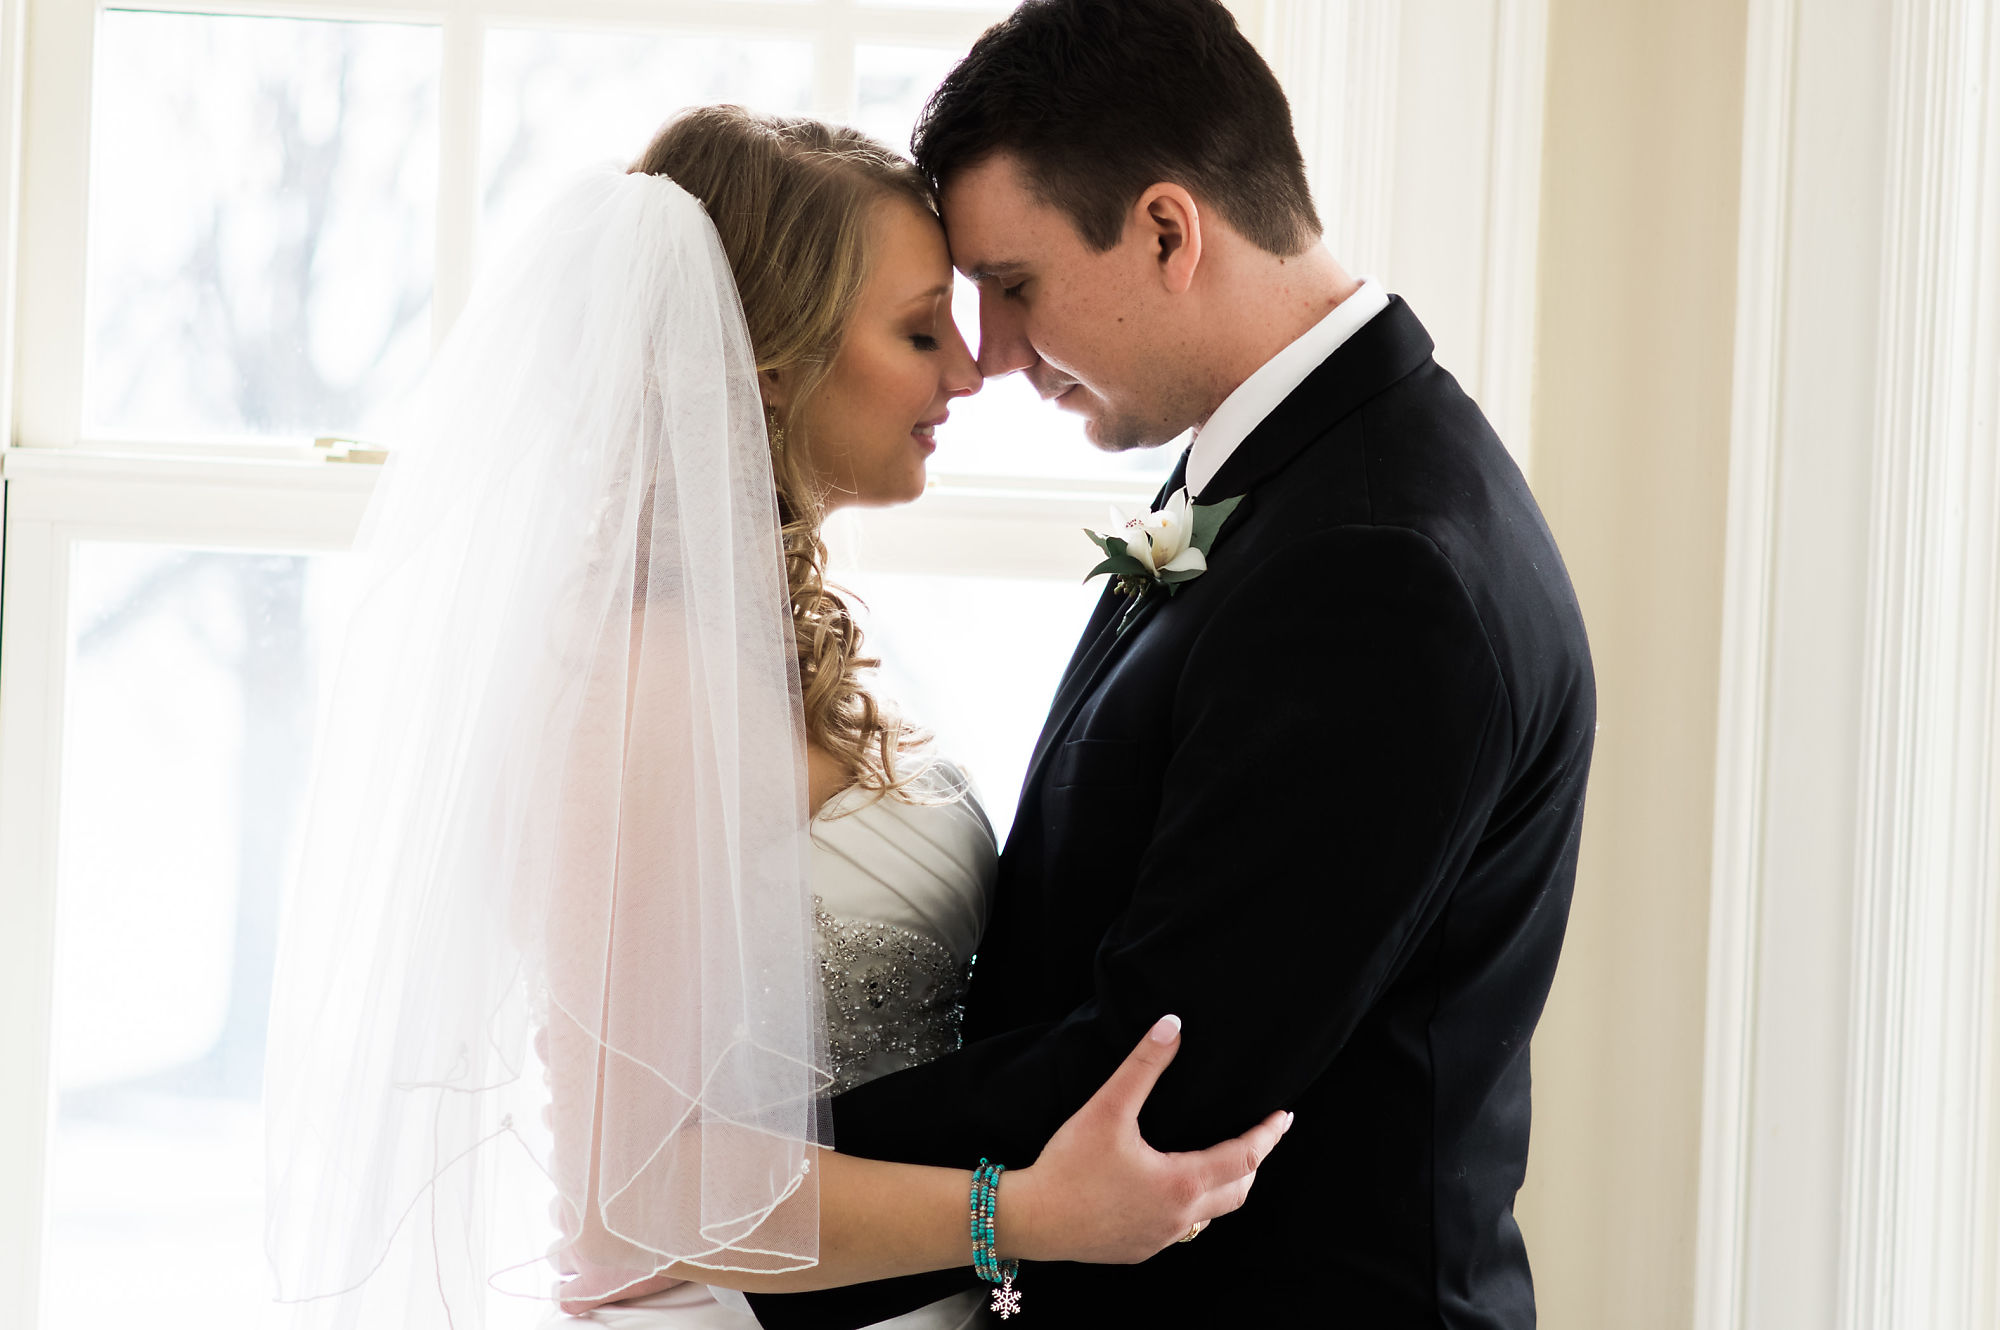 Newlywed's Kaitlyn and Nick embrace for portraits at Paletta Mansion during their wedding shoot with Burlington Wedding Photographer Jennifer Blaak.